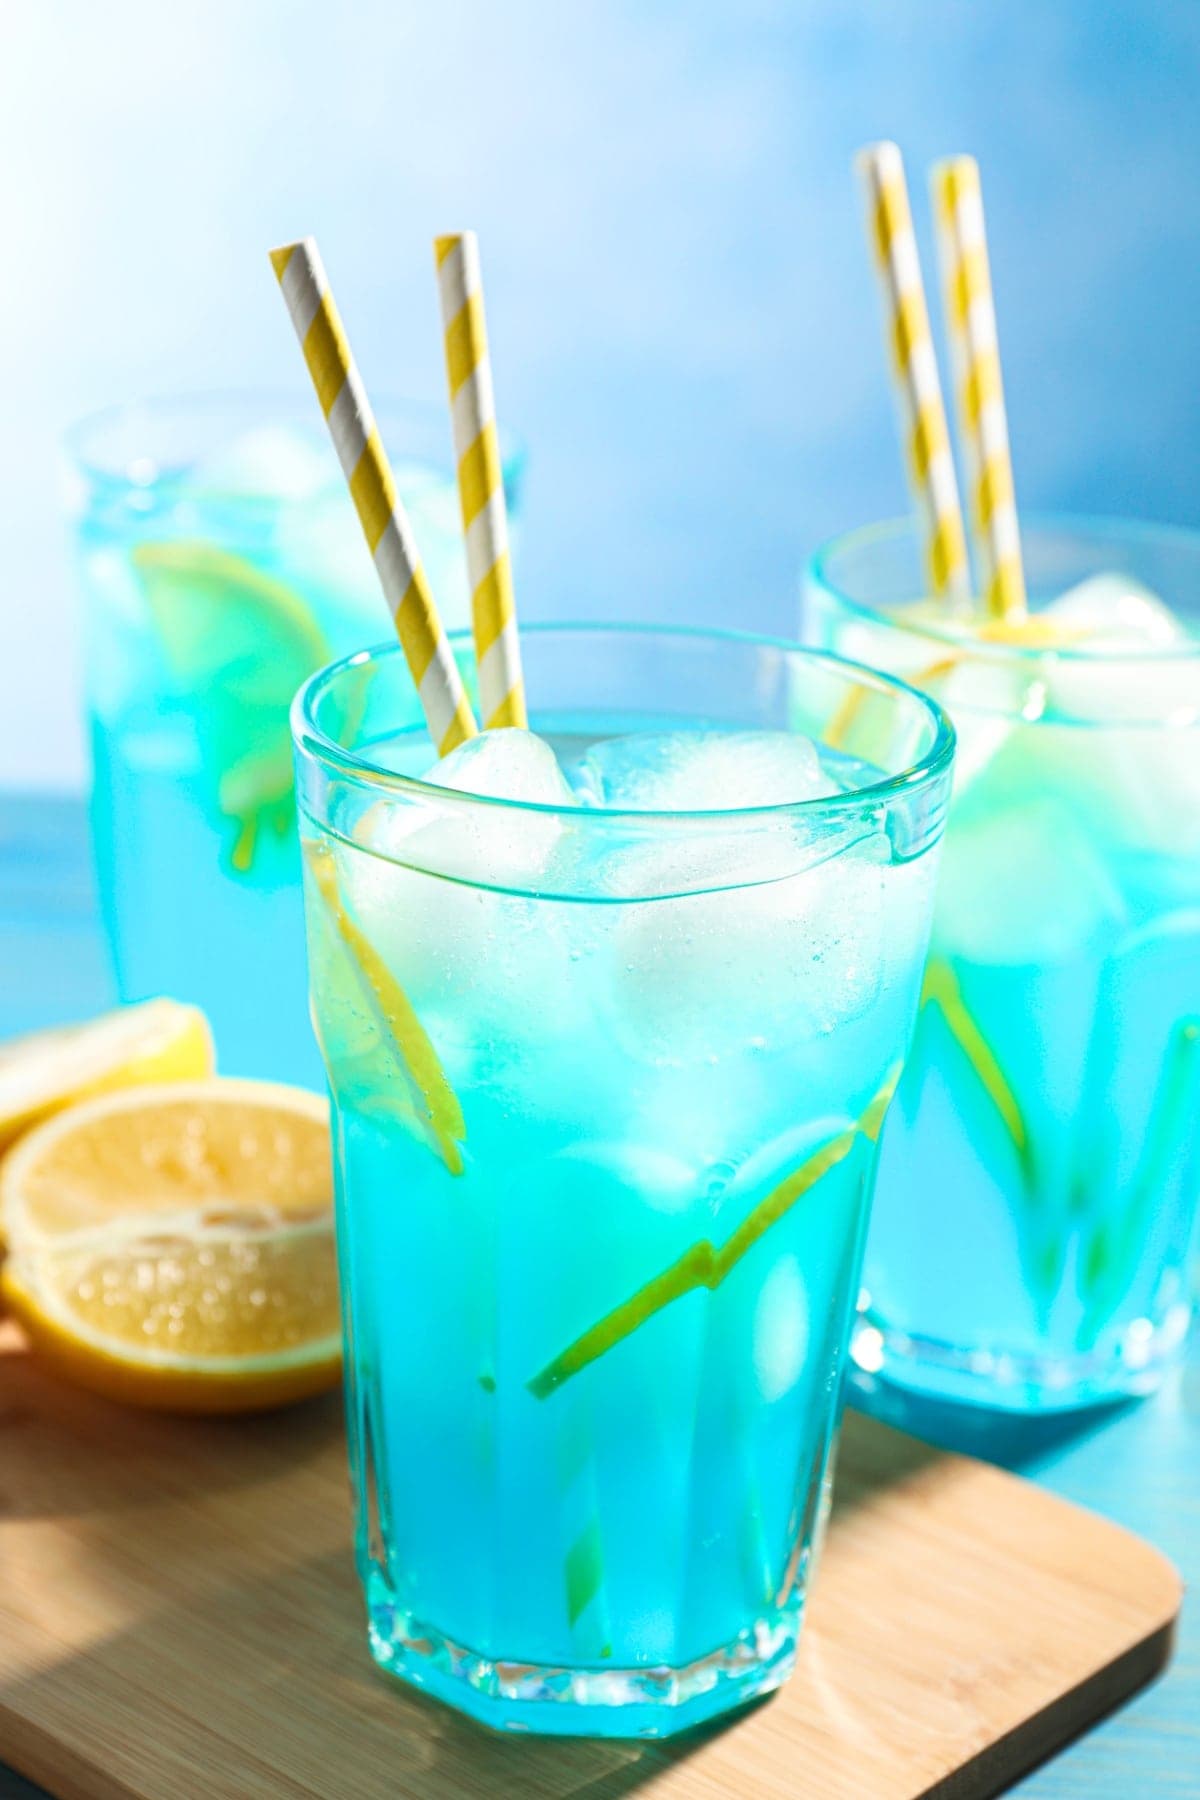 Icy Blue Lagoon Cocktails on highball glasses with yellow striped straws